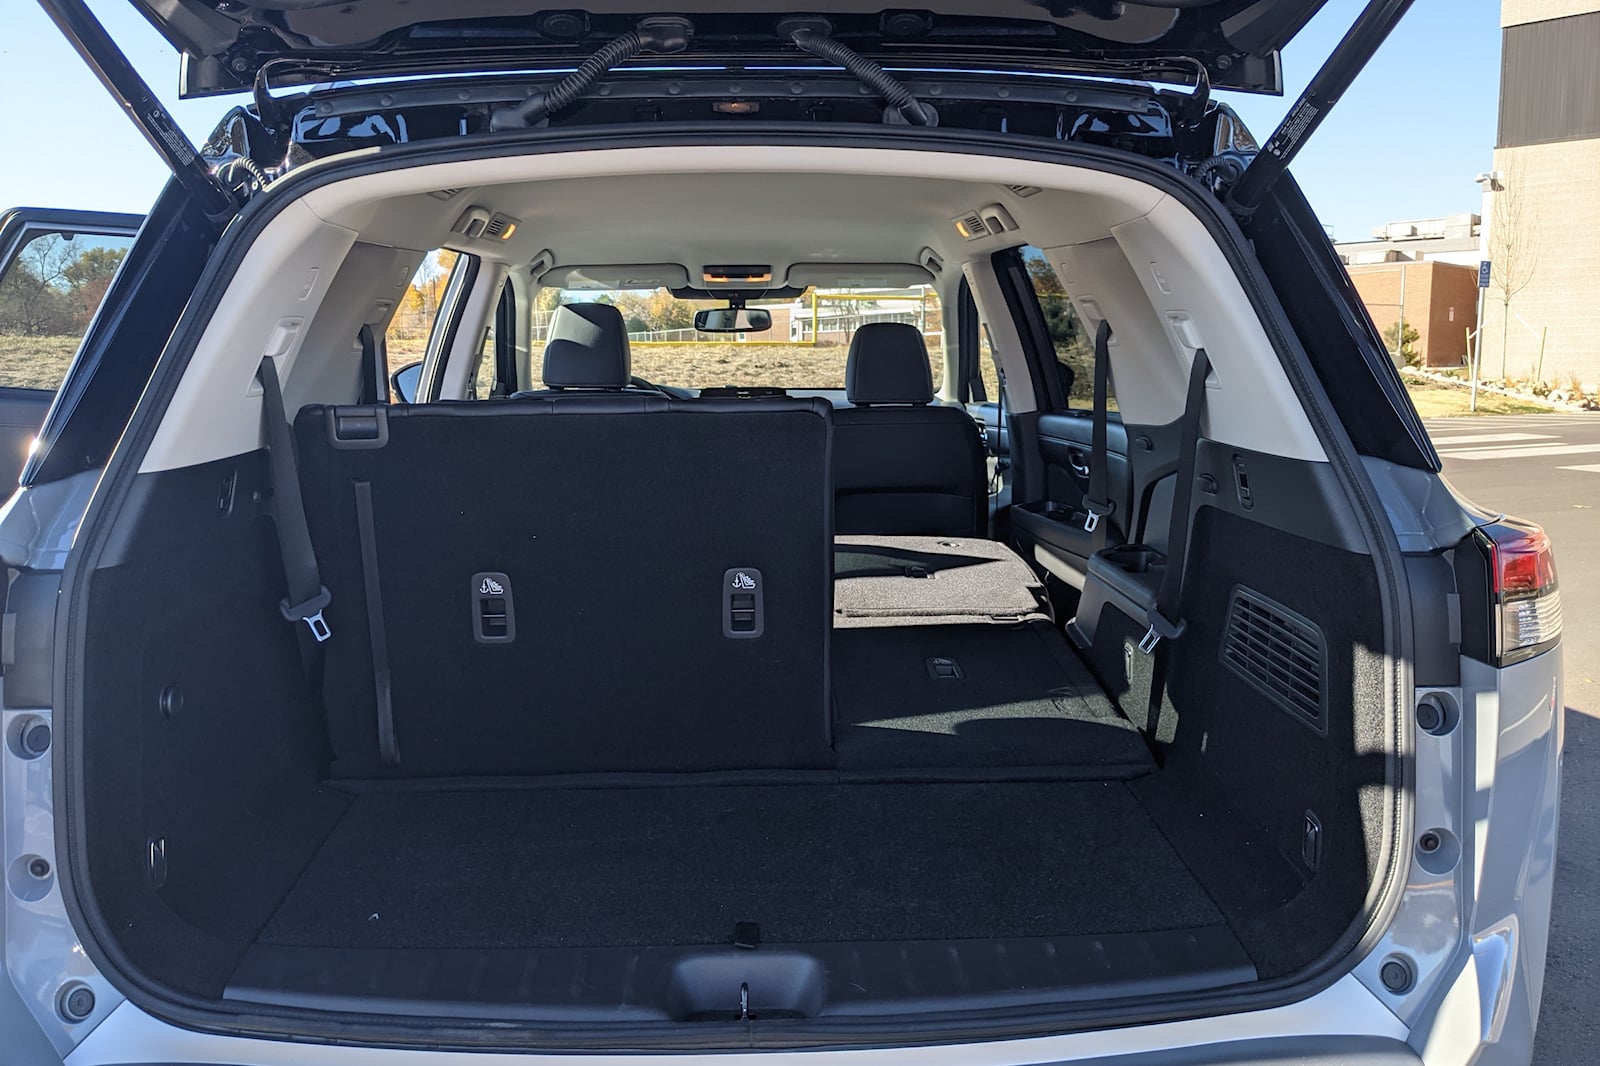 2023 Nissan Pathfinder Interior Dimensions Seating, Cargo Space